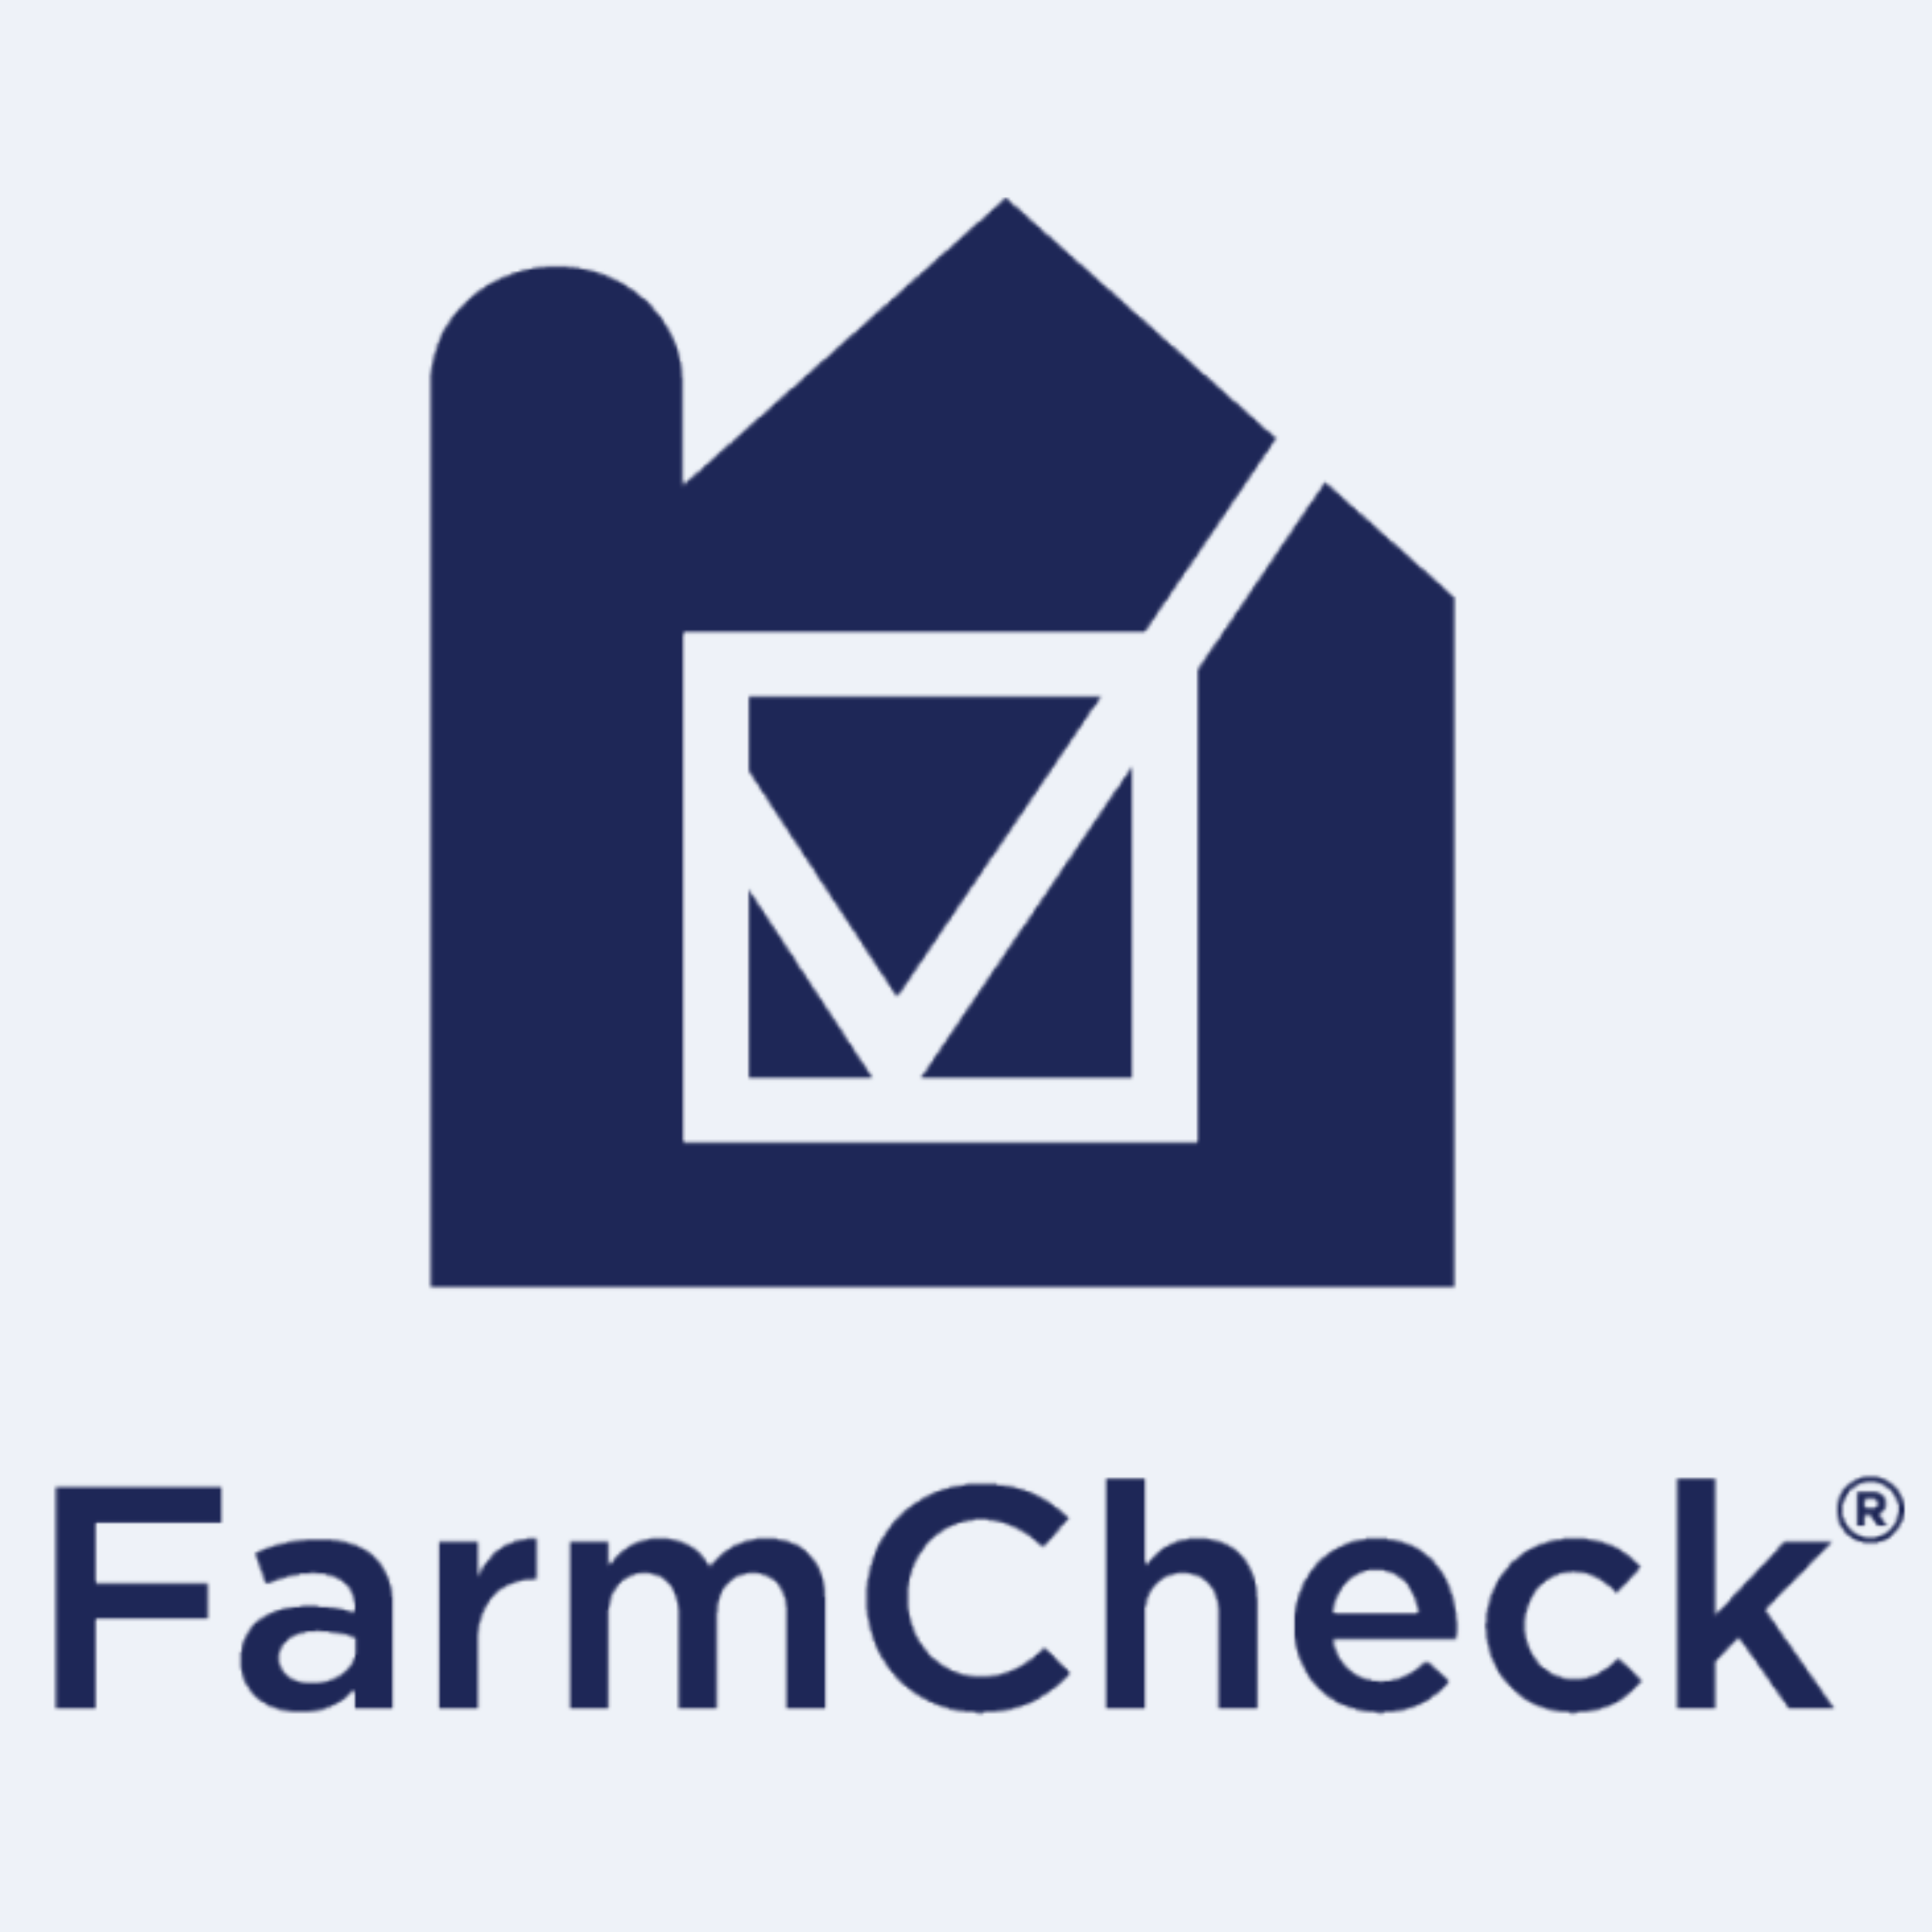 This is the logo for FarmCheck.